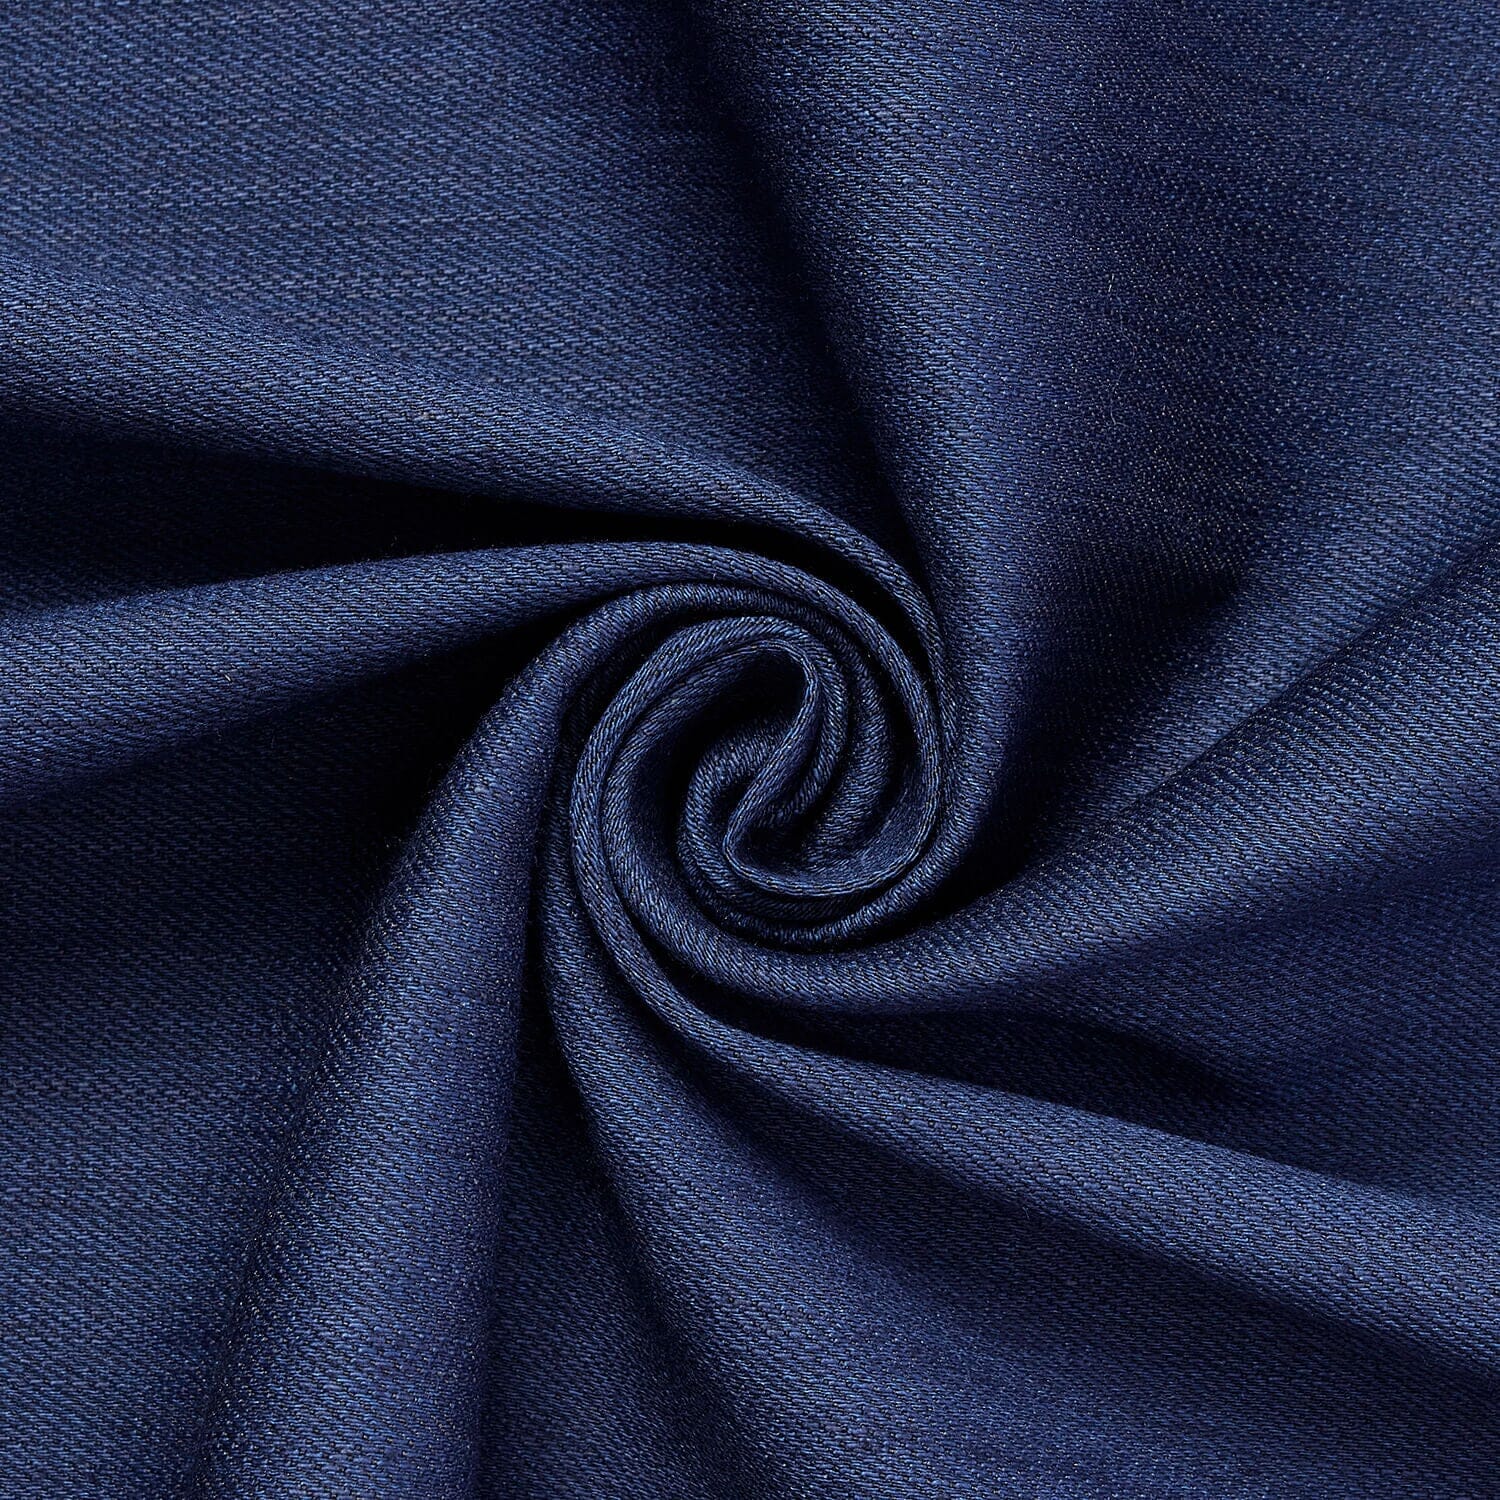 French Terry 90/10 Cotton Poly 14 oz [SNT64310] : Sand Textiles - wholesale  fabric Knit 1x1 2x1 Rib and Jersey and French Terry, Rib Lycra, Baby Rib  fabrics, Interlock and Denim, AA TECH DESIGN